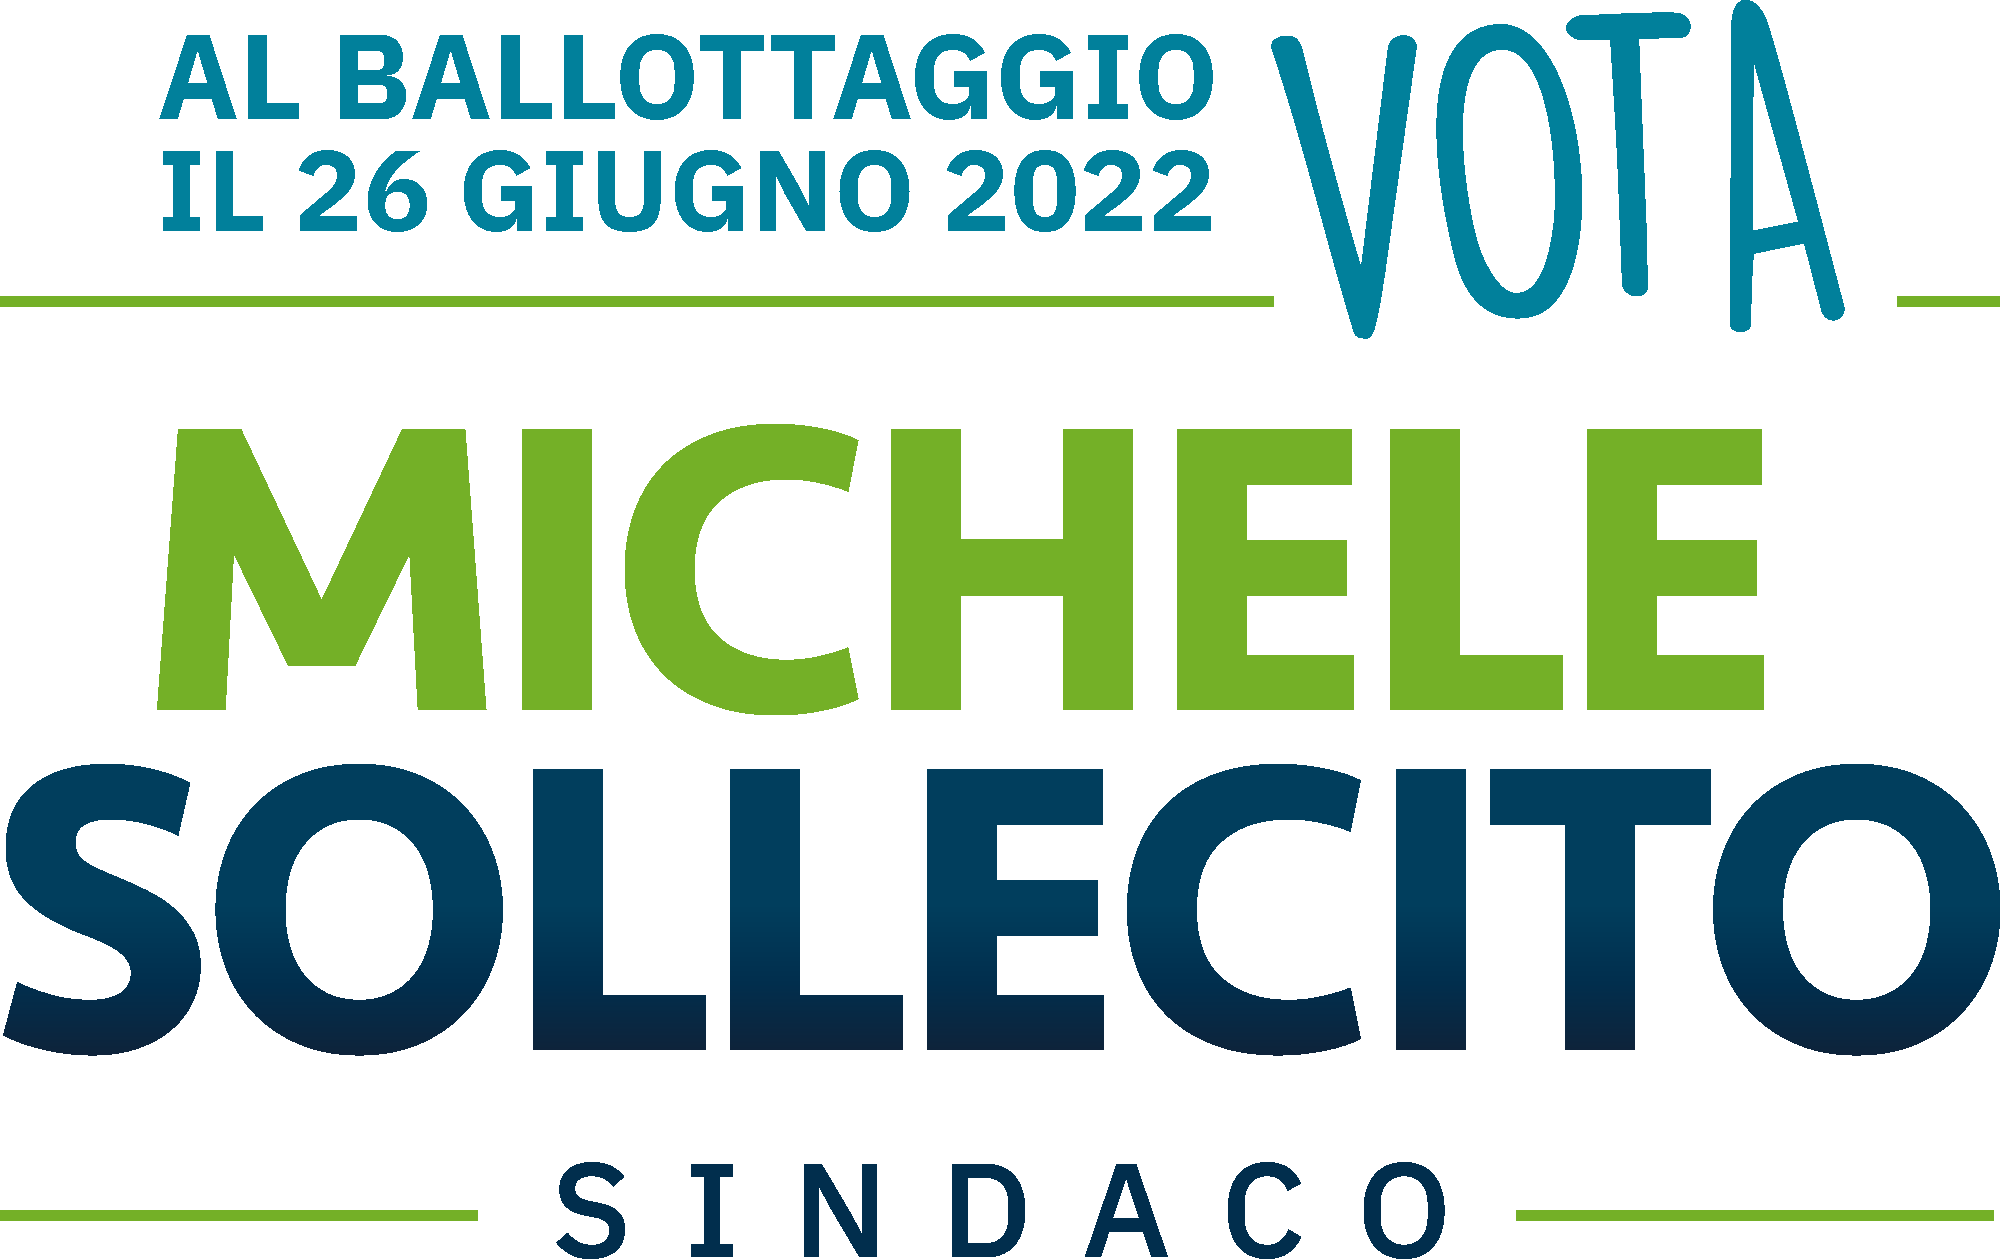 https://michelesollecito.it/wp-content/uploads/2022/06/B_Home-logo-mob.png